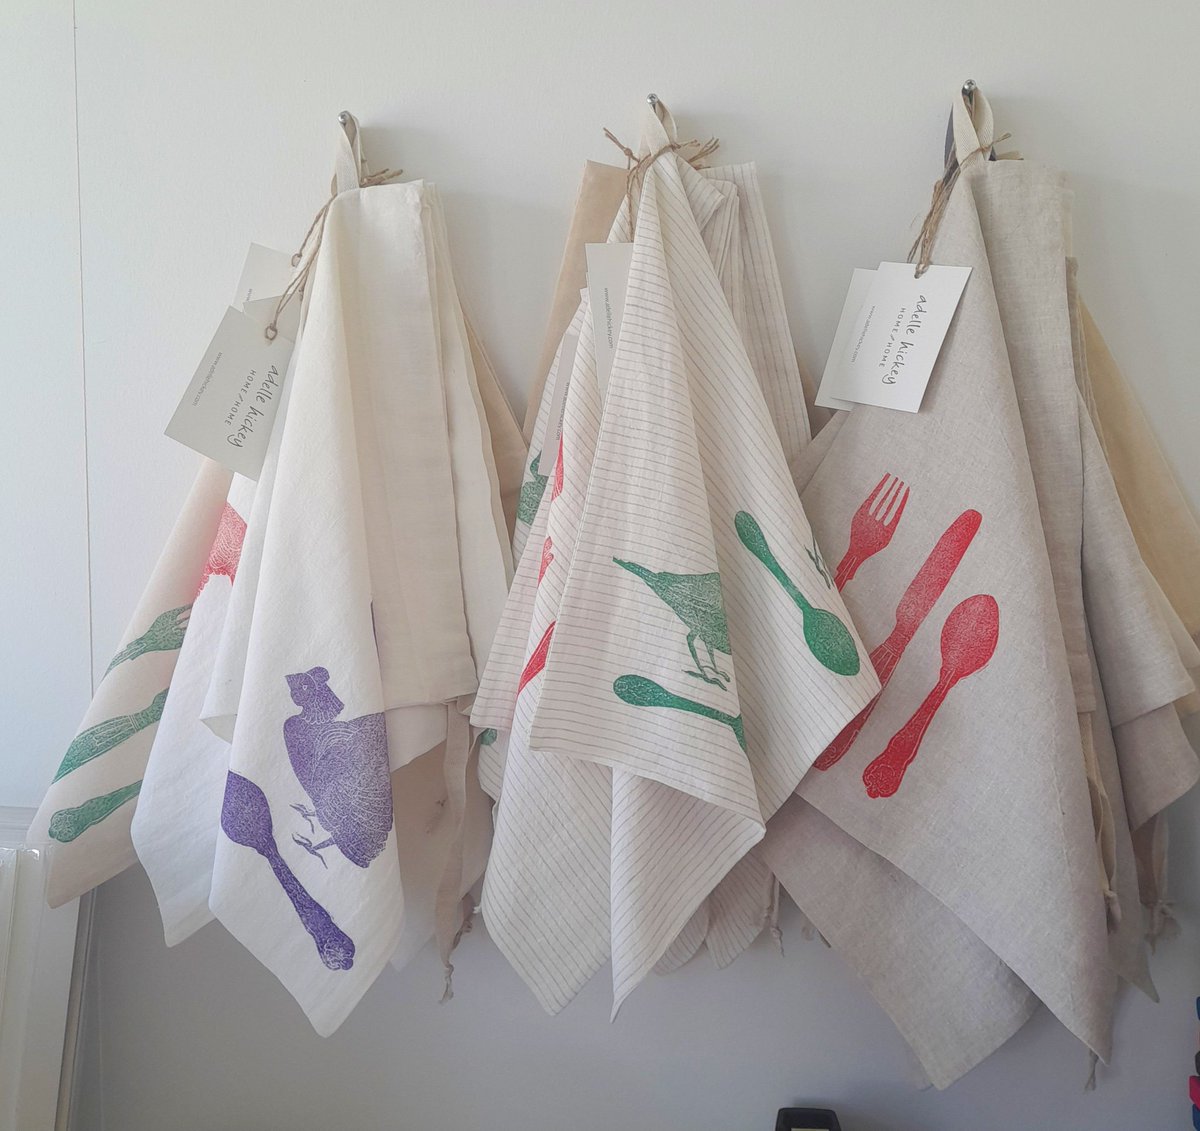 Home from Home Hand printed 100% Irish linen bread bags. Delighted to have a stand in the @DCCIreland #craftvillage @BordBiaBloom. #handprinted #handmade #madeinireland